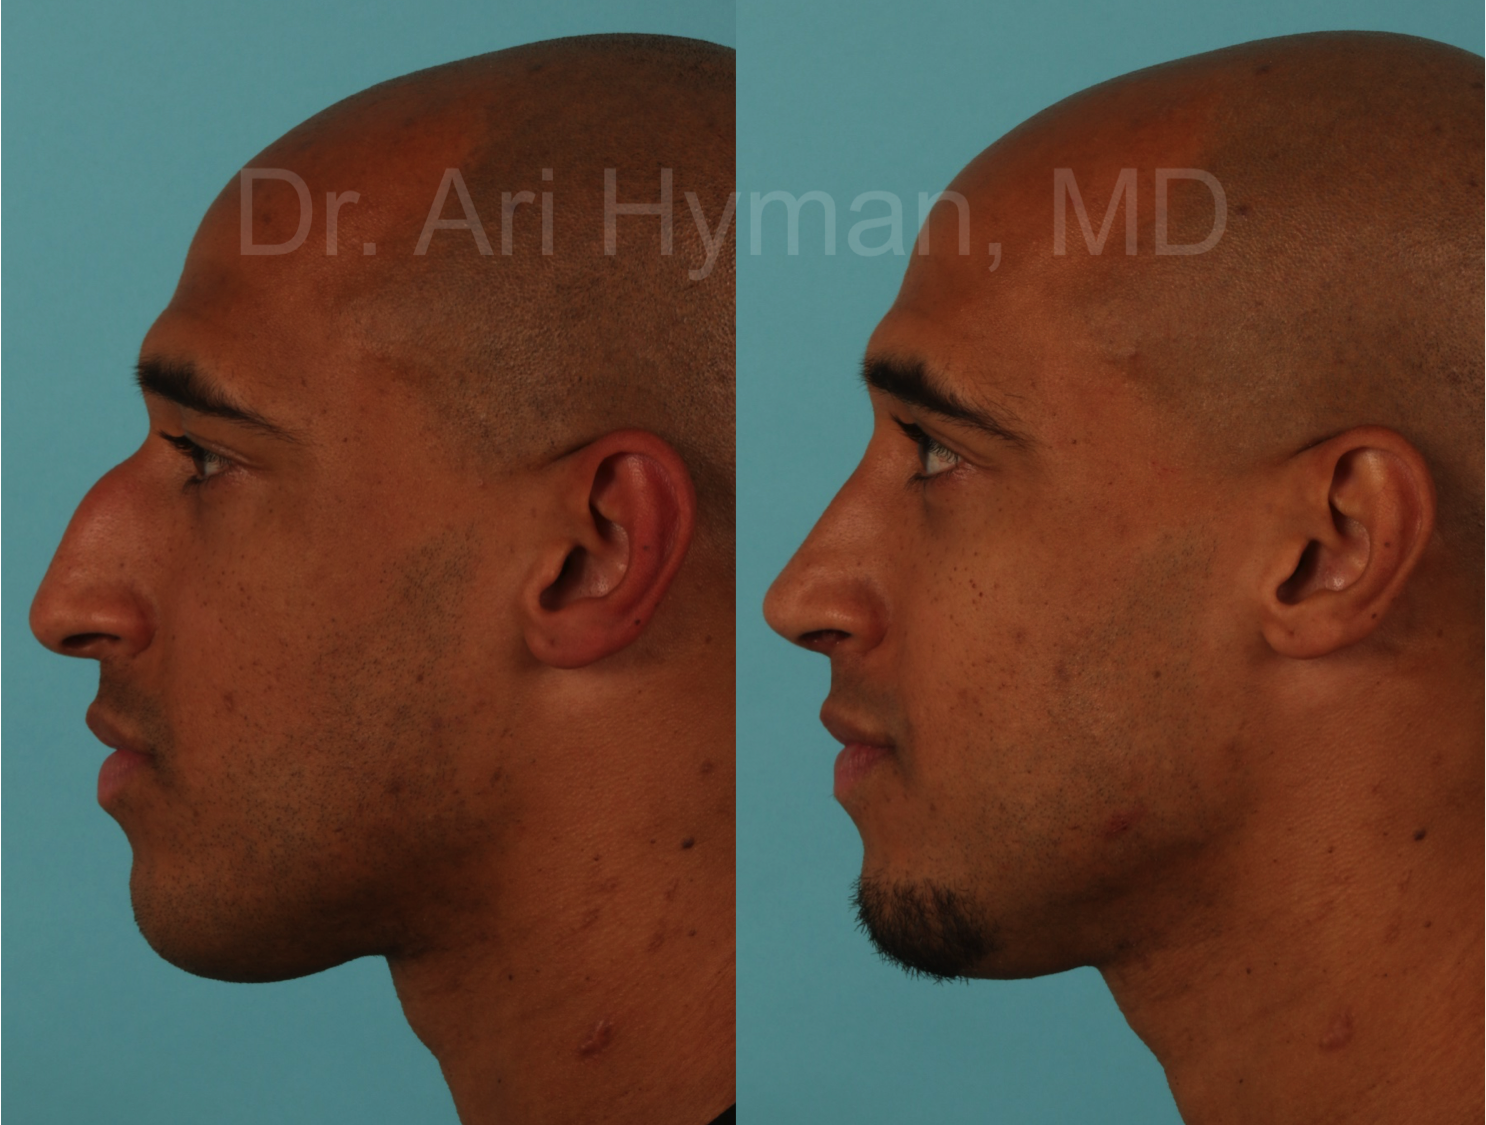 Rhinoplasty - before and after view of male's nose